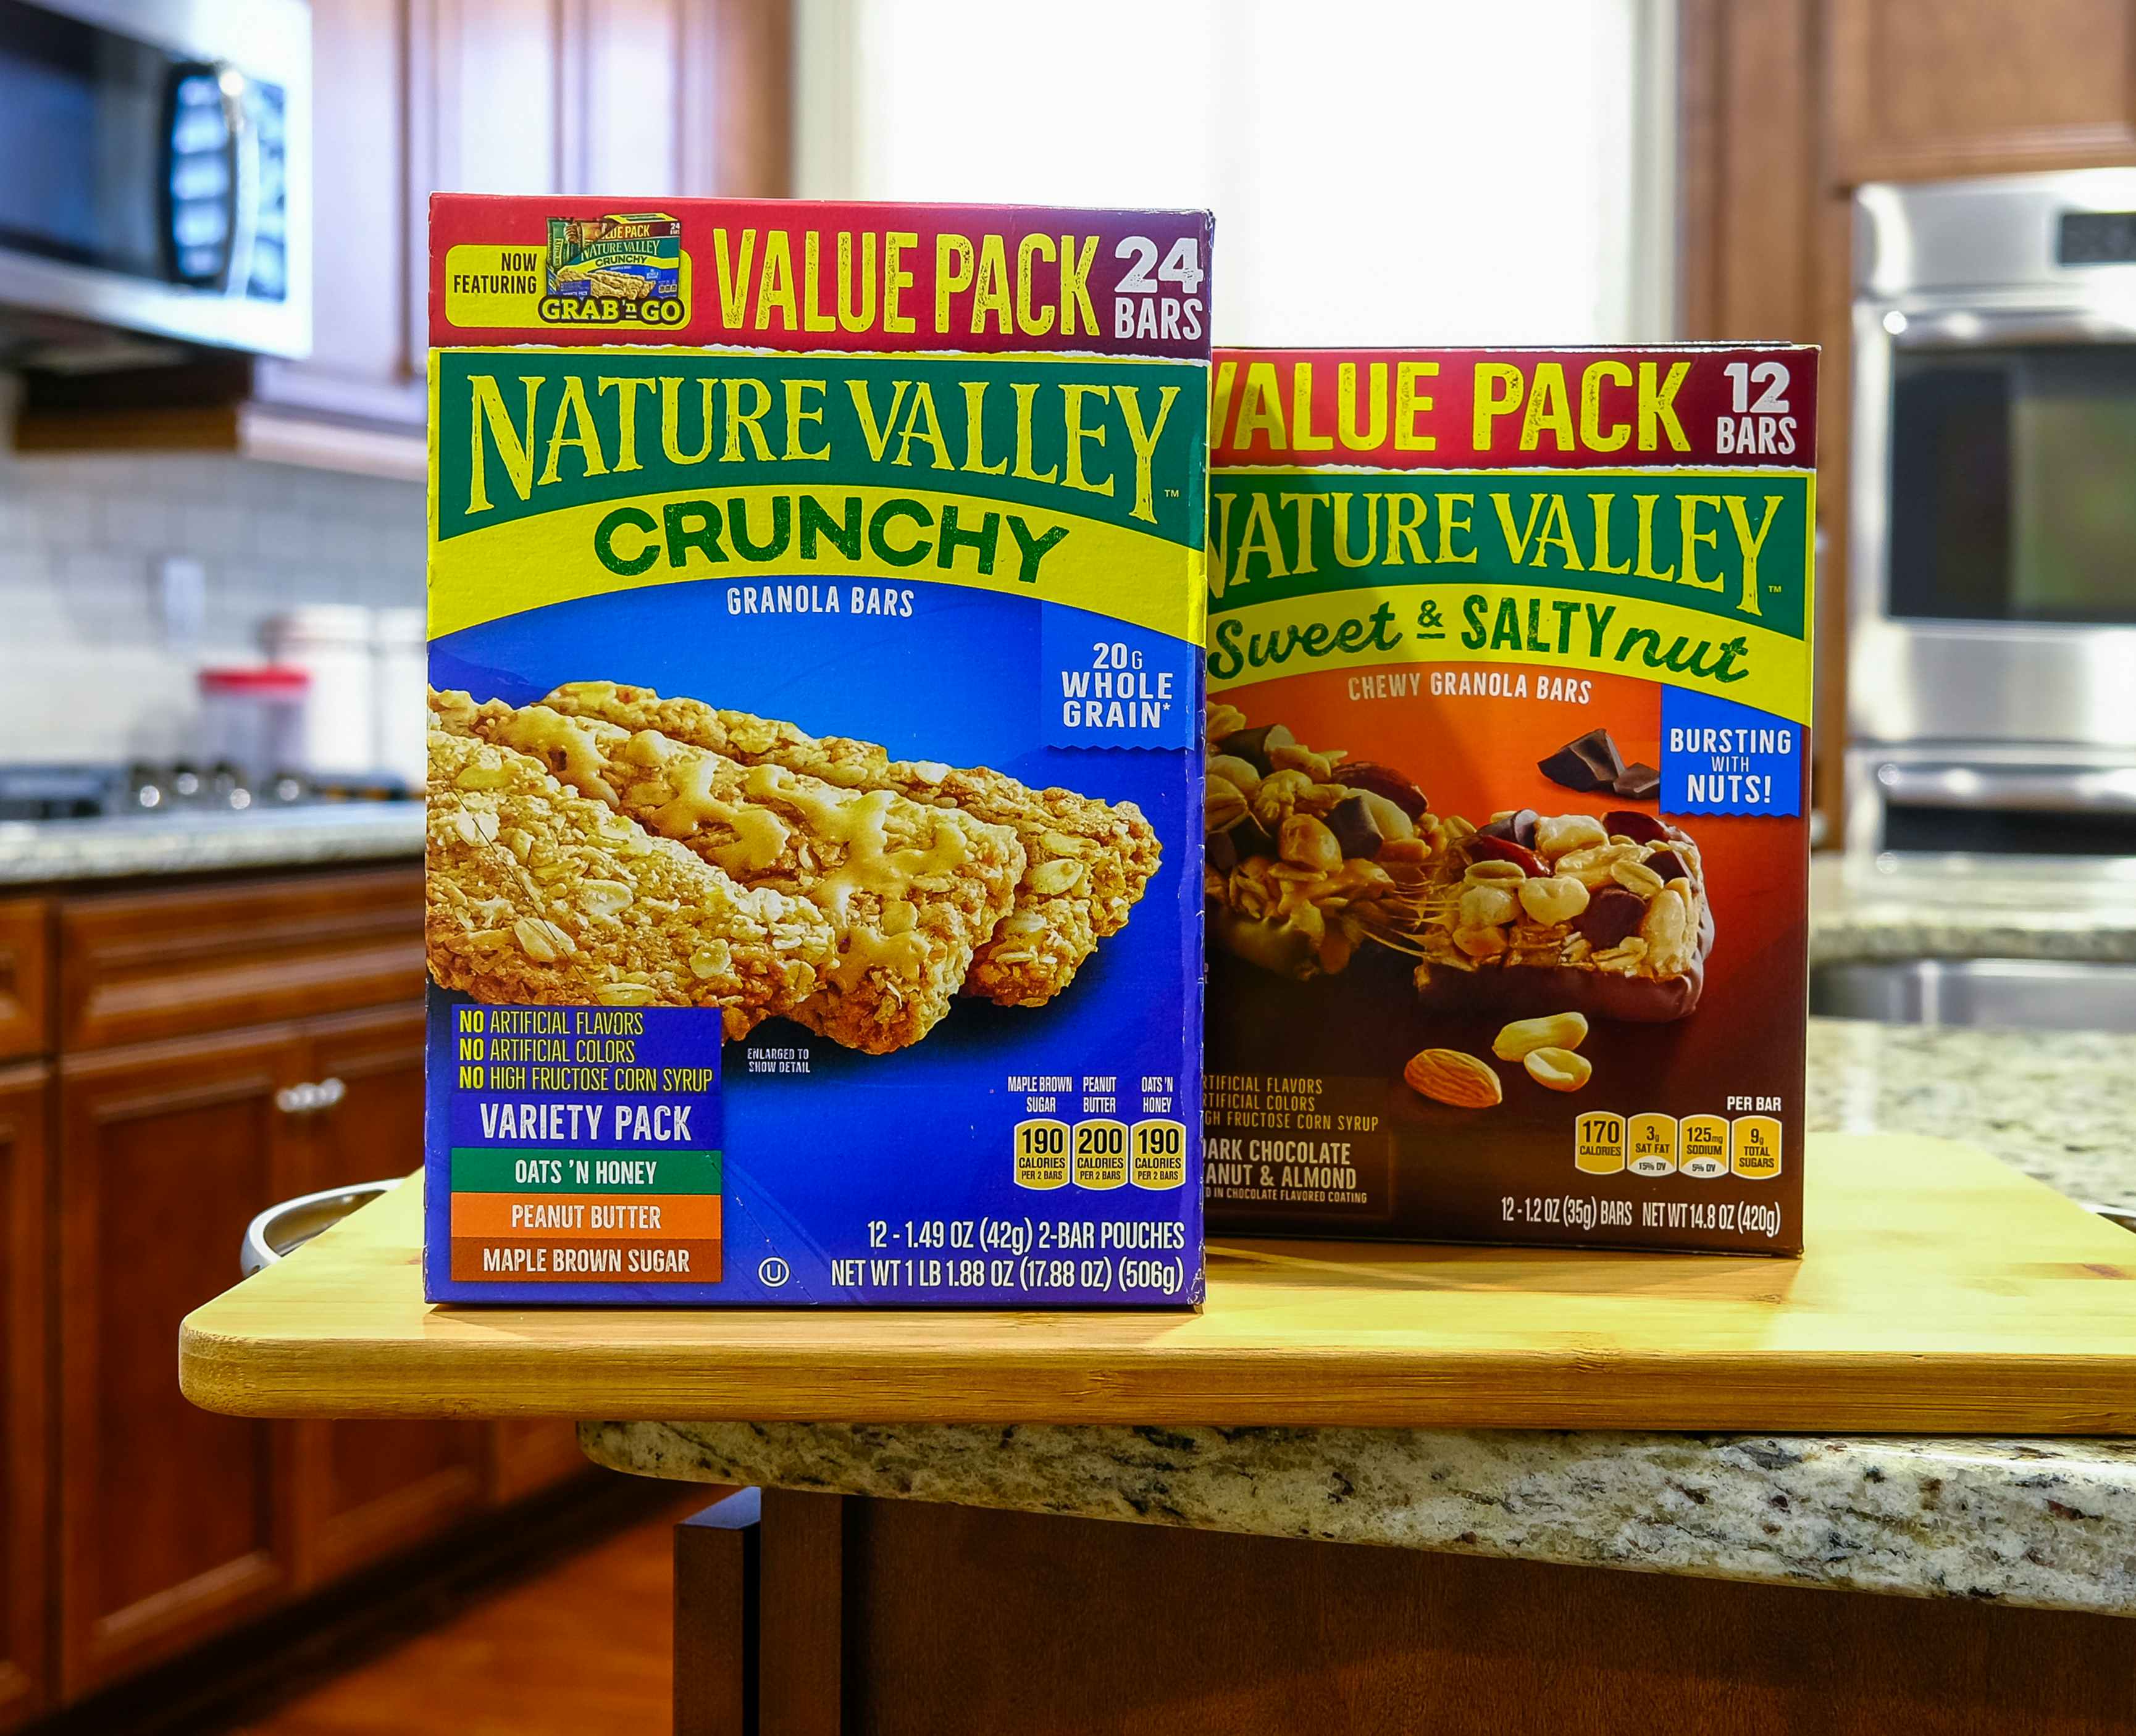 Two boxes of Nature Valley bars sitting on a kitchen counter.